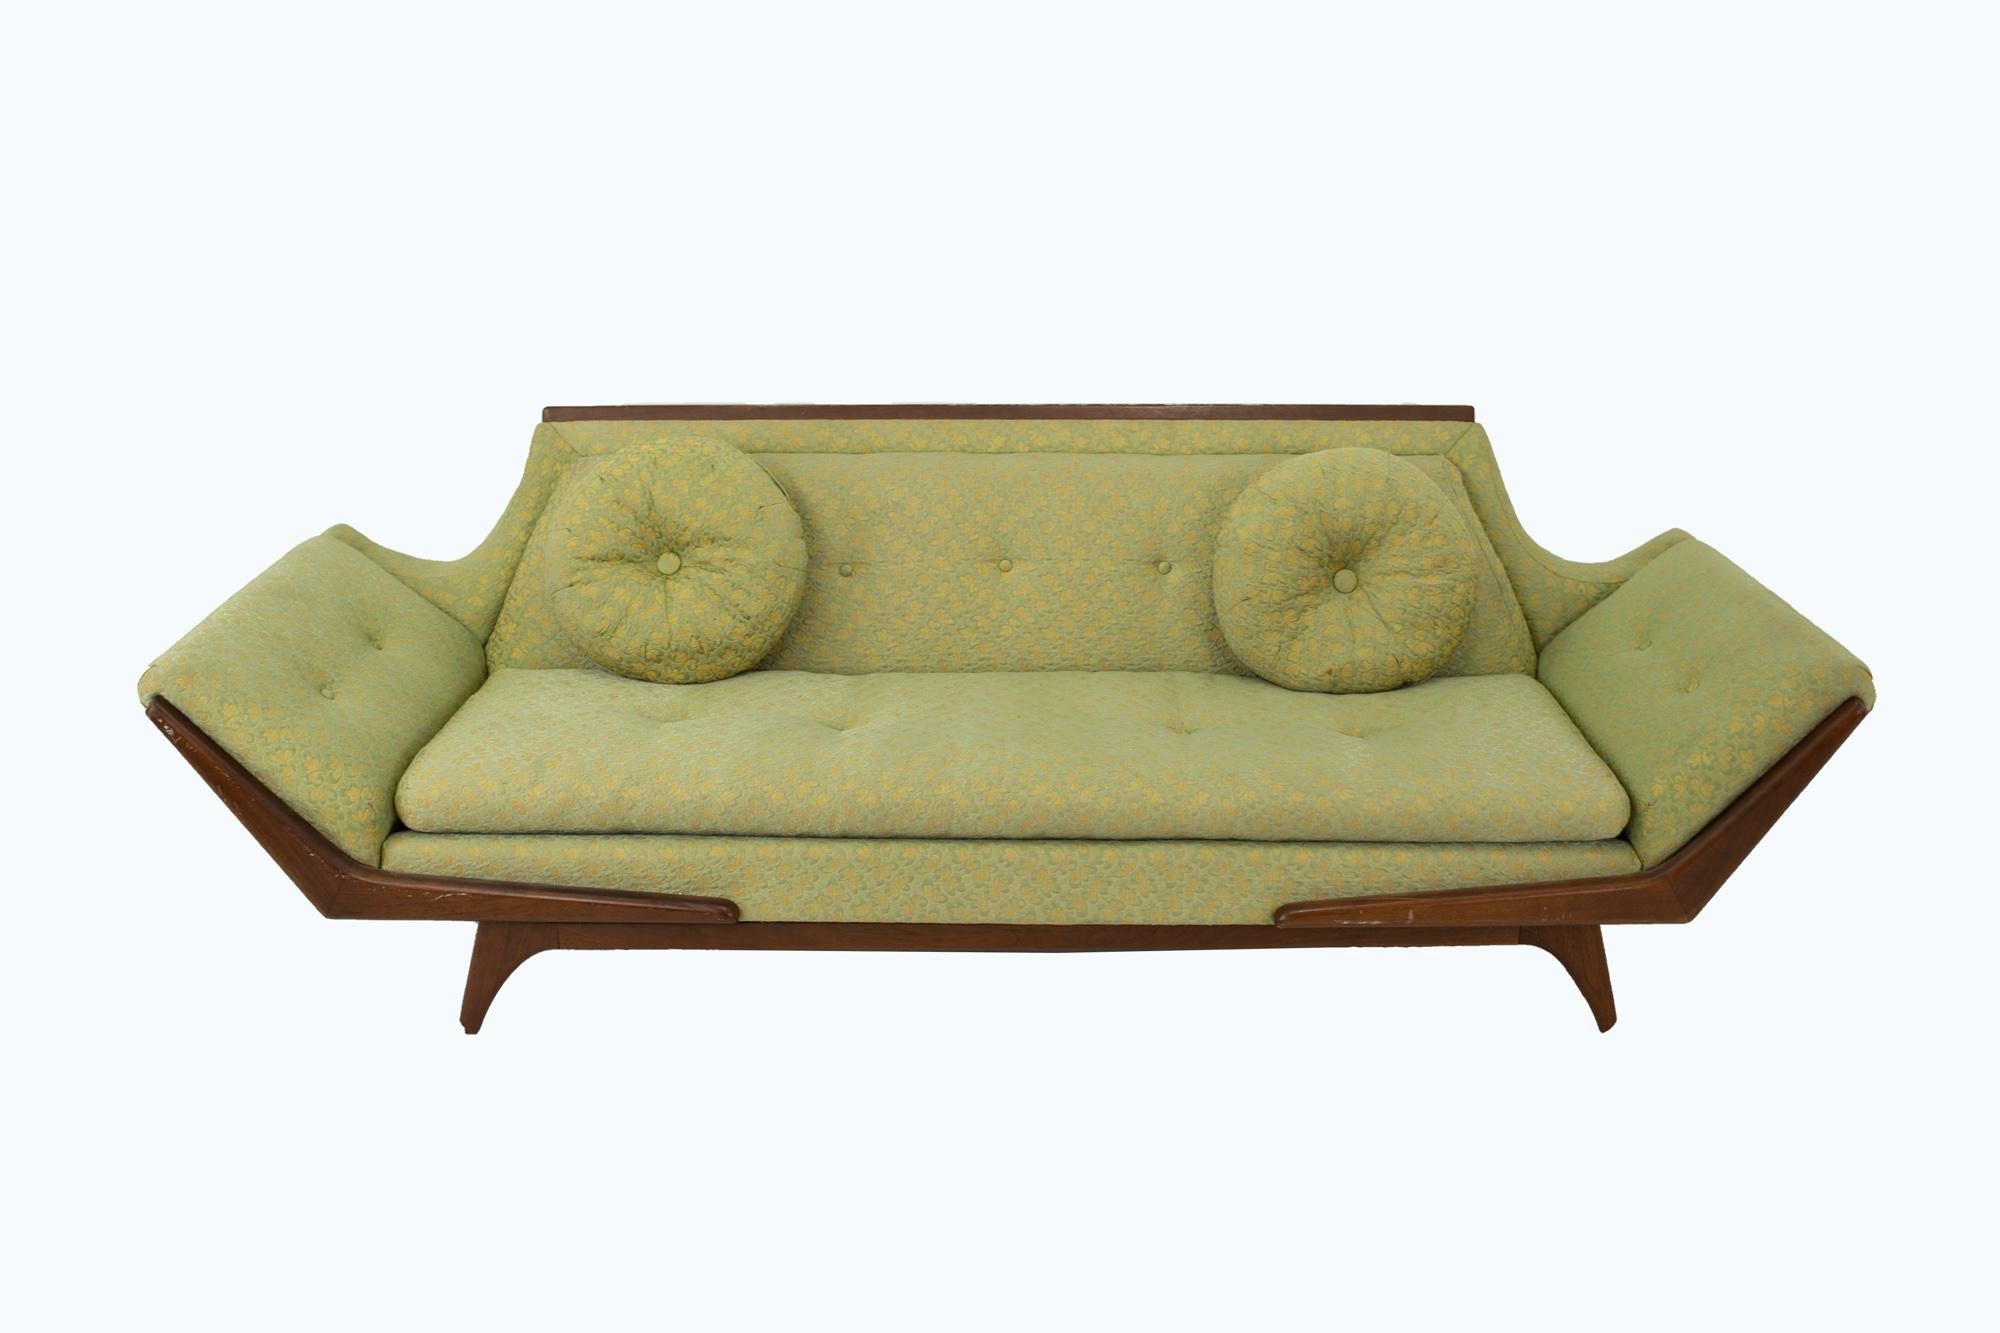 Adrian Pearsall midcentury gondola sofa
Sofa measures: 97 wide x 35 deep x 29.5 high

All pieces of furniture can be had in what we call restored vintage condition. This means the piece is restored upon purchase so it’s free of watermarks, chips